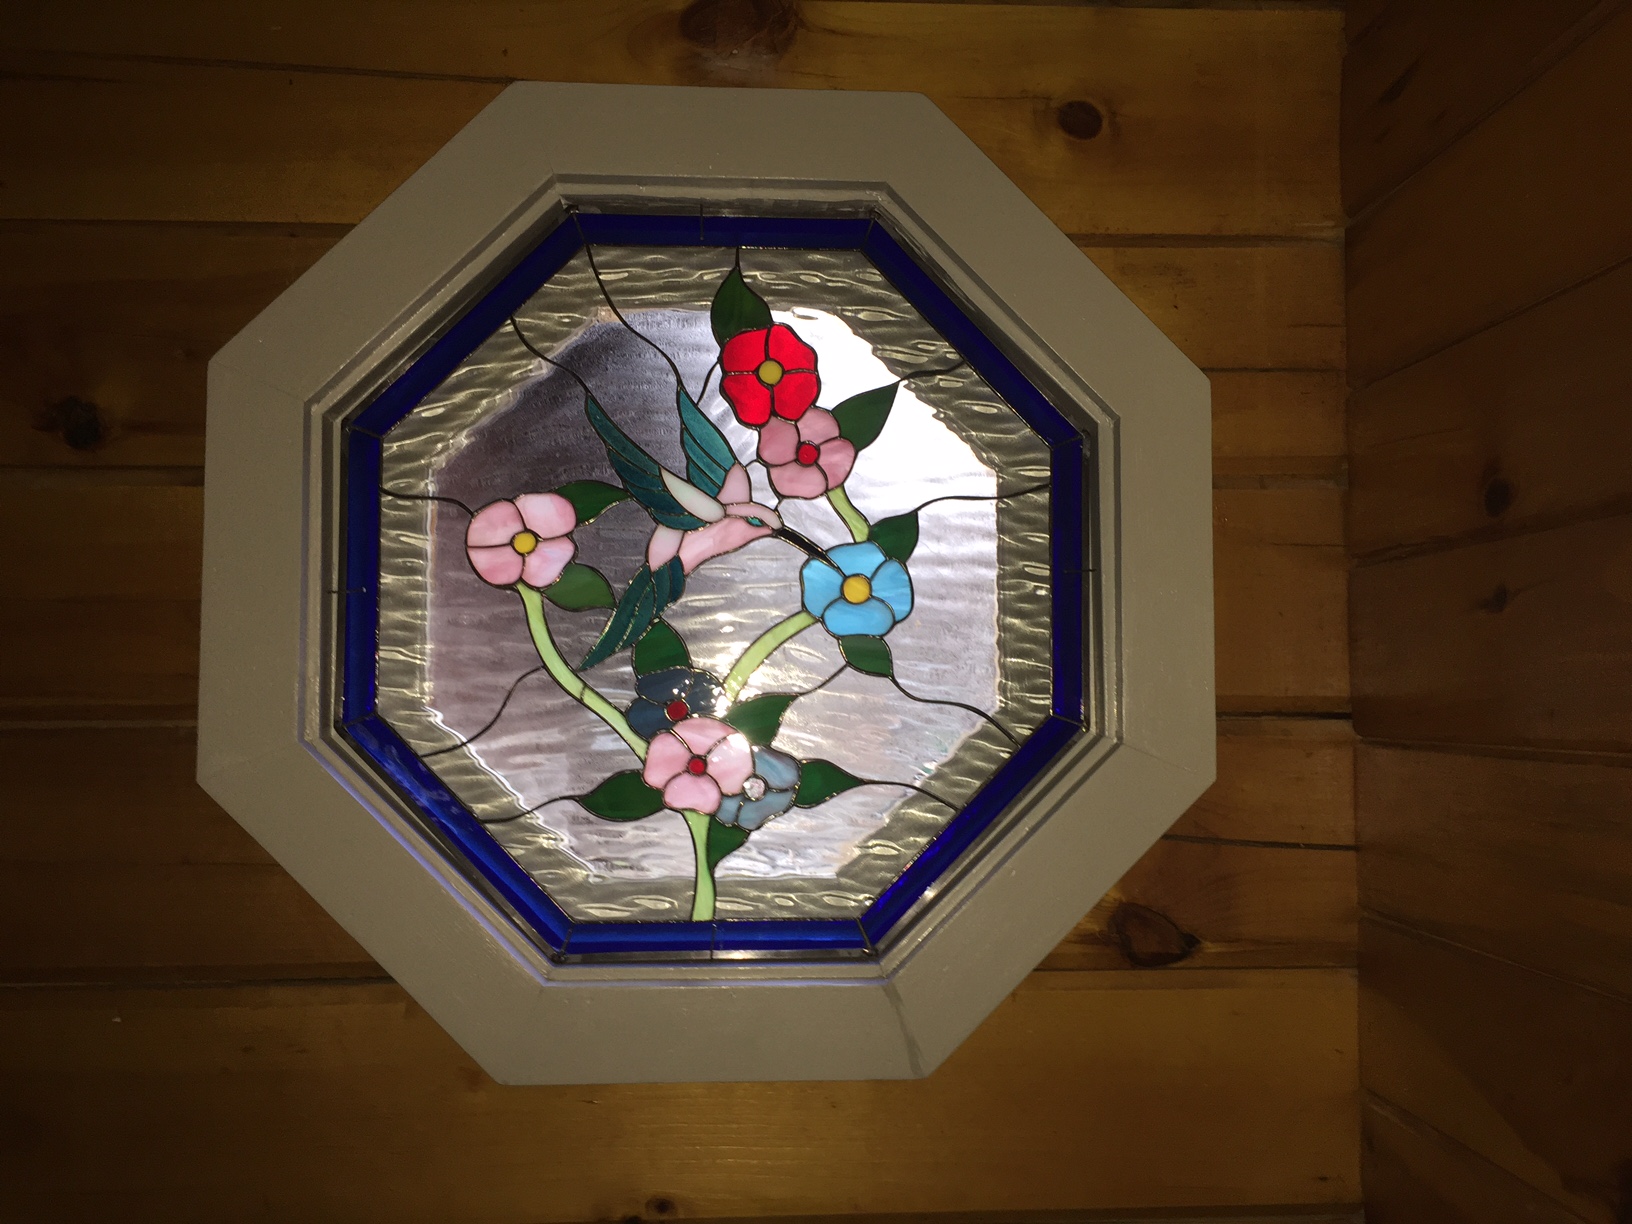 Stained glass hummingbird & flowers octagon panel set against their...